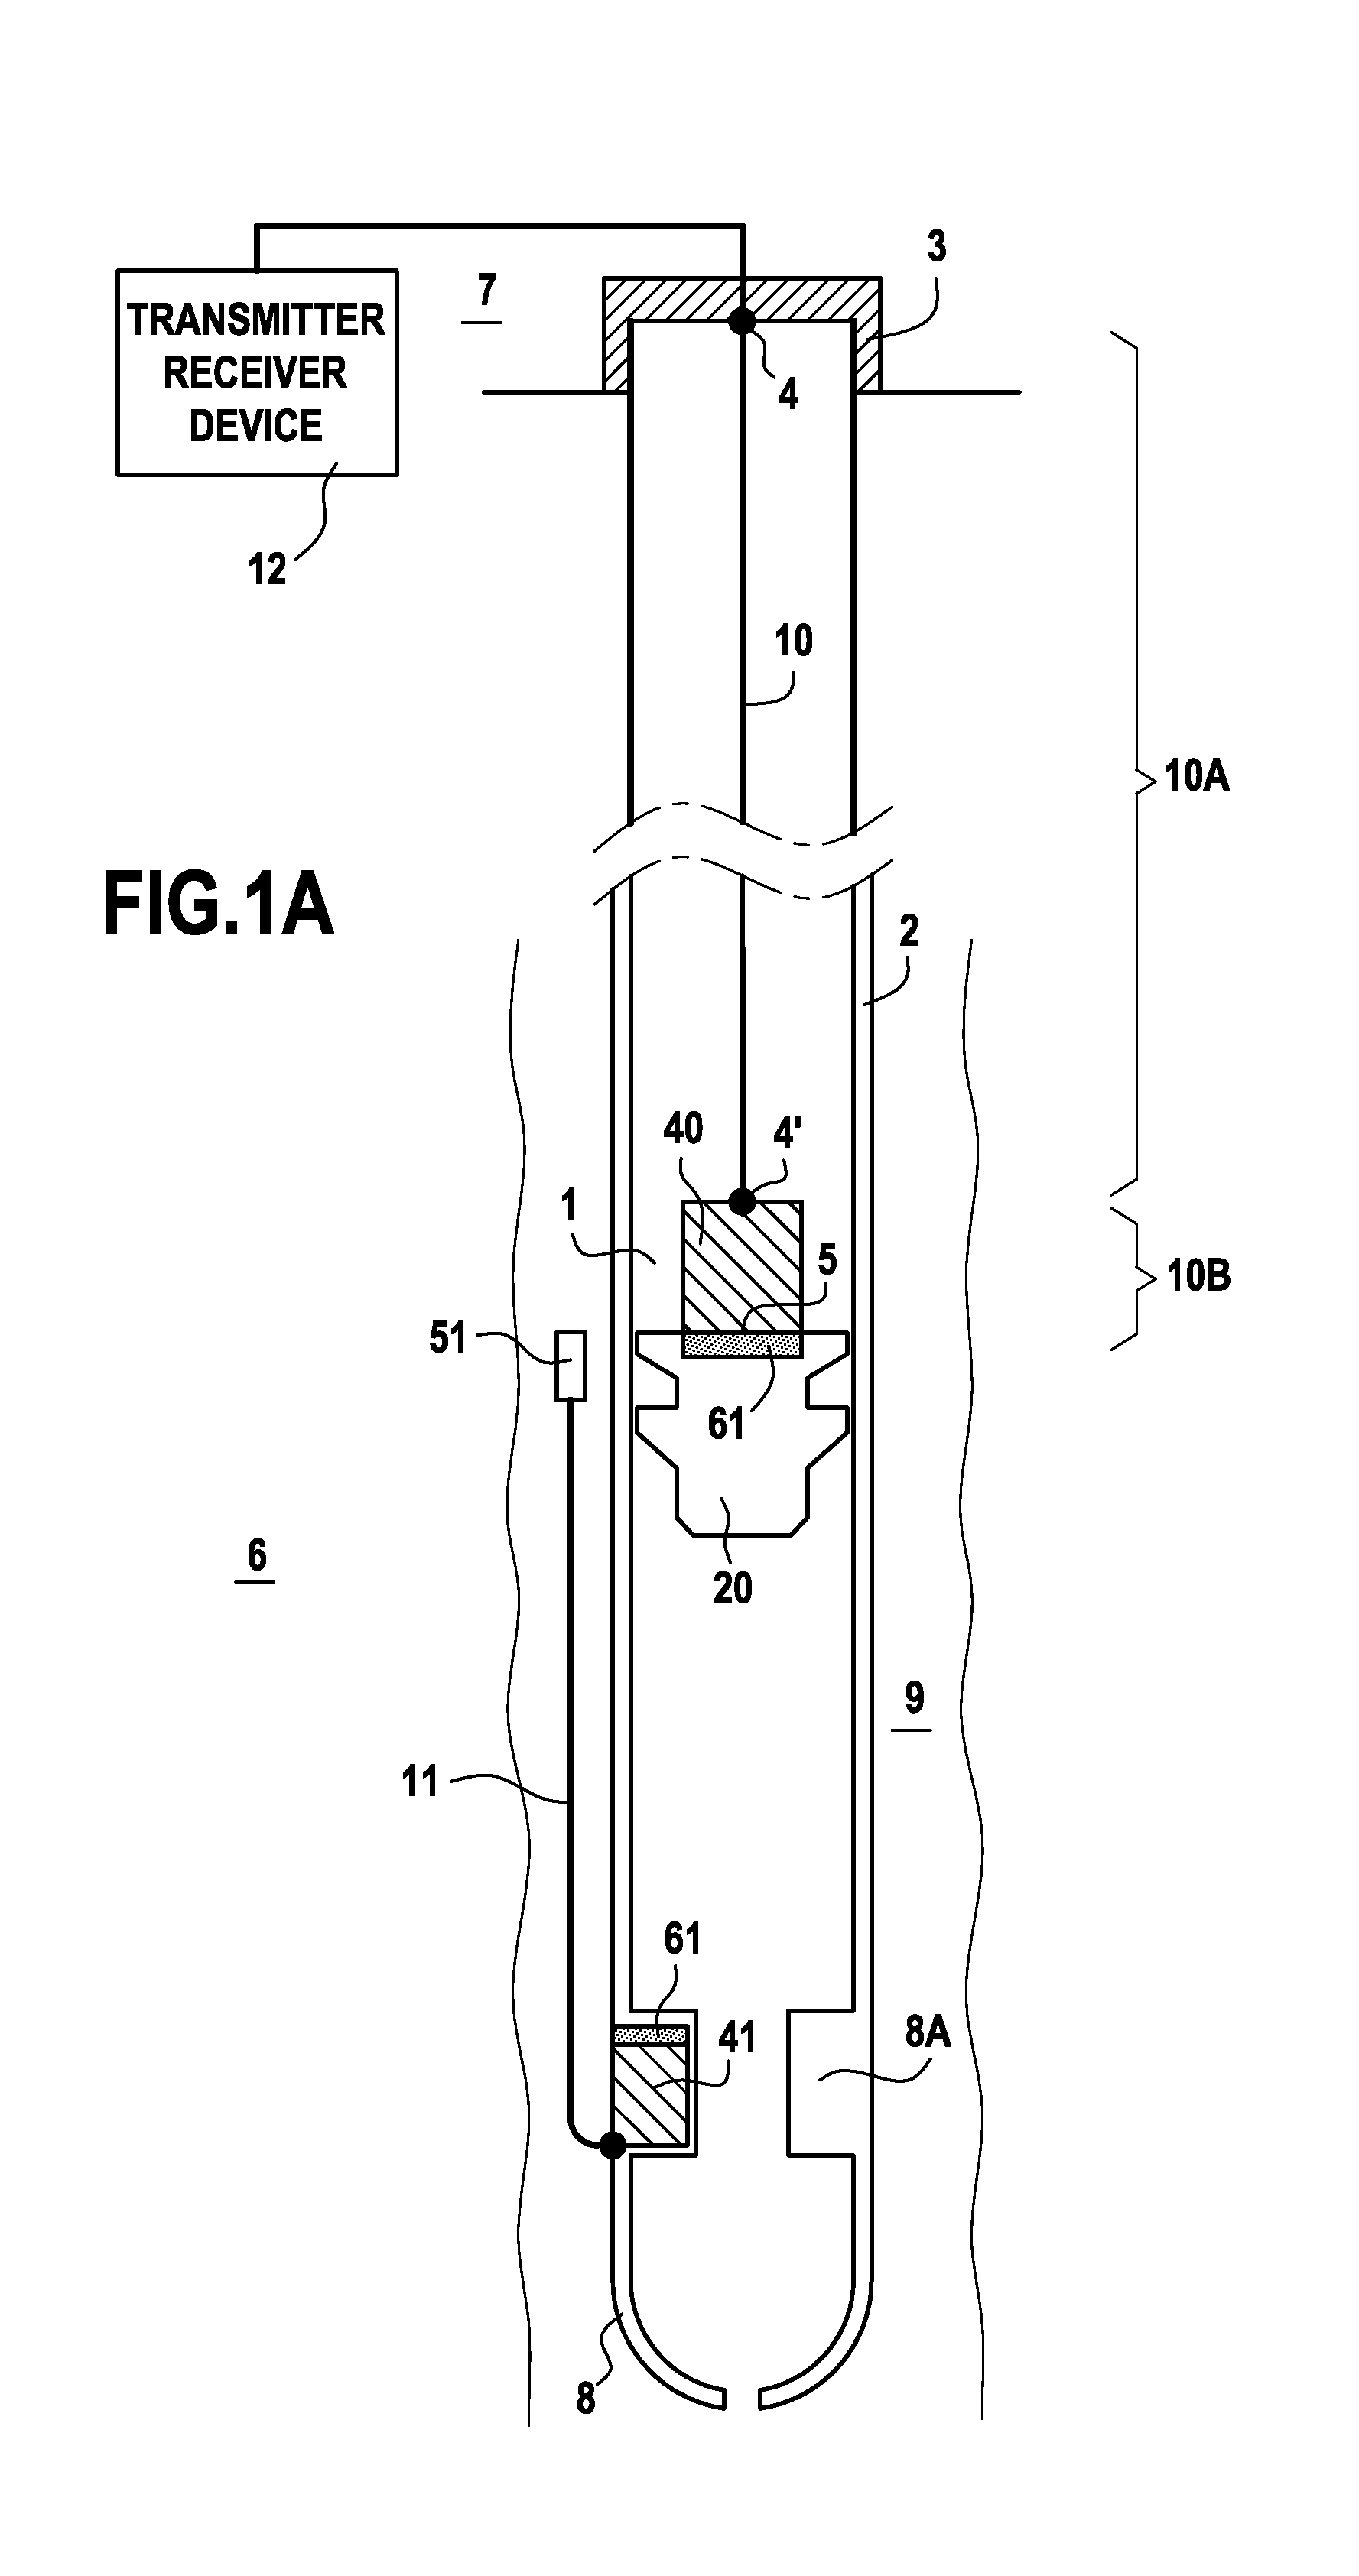 Method and Apparatus for Measuring a Parameter within the Well with a Plug